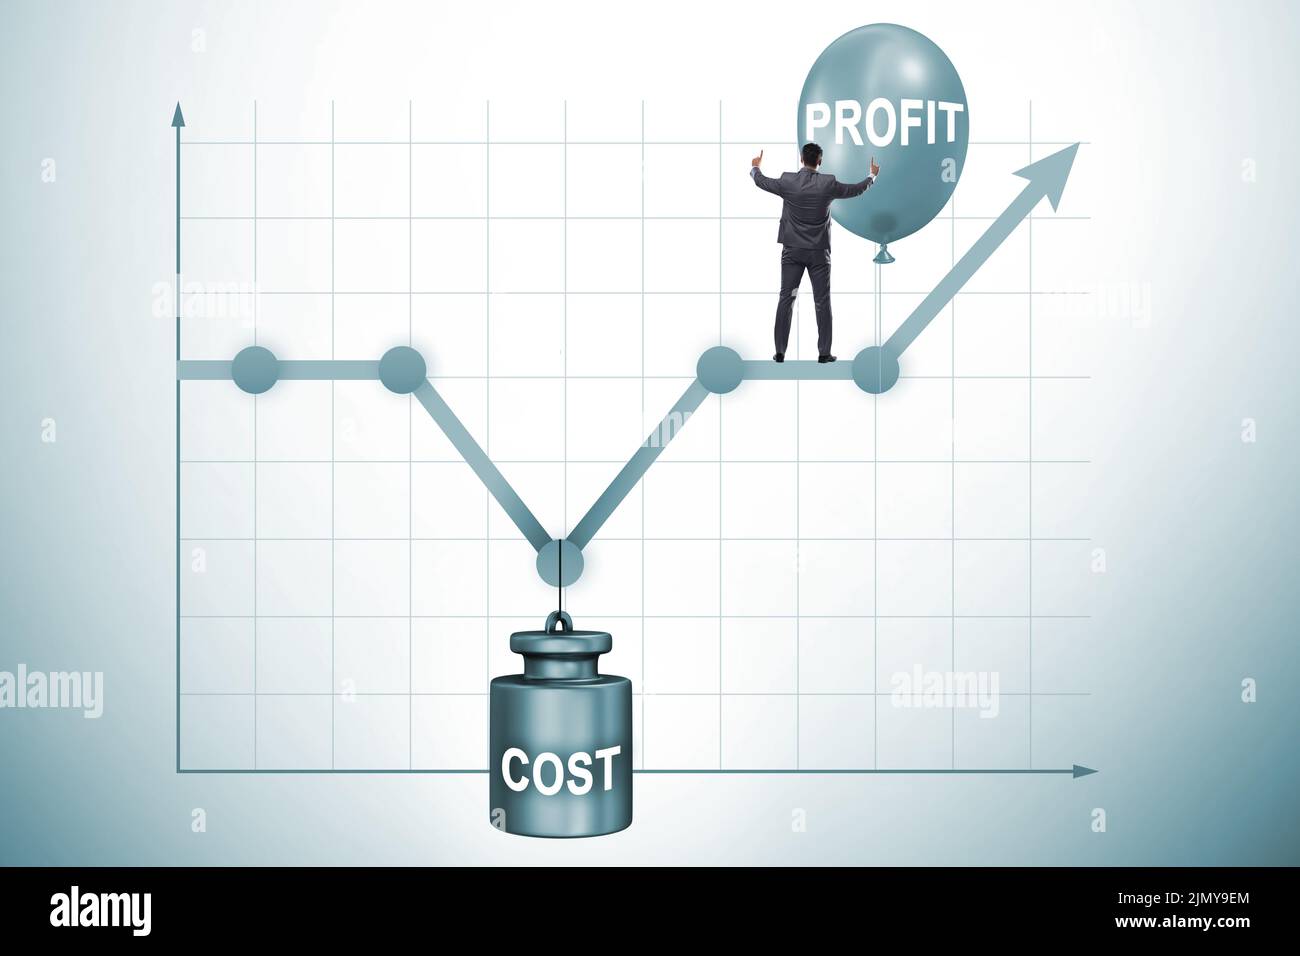 Chart with profit and cost and businessman Stock Photo